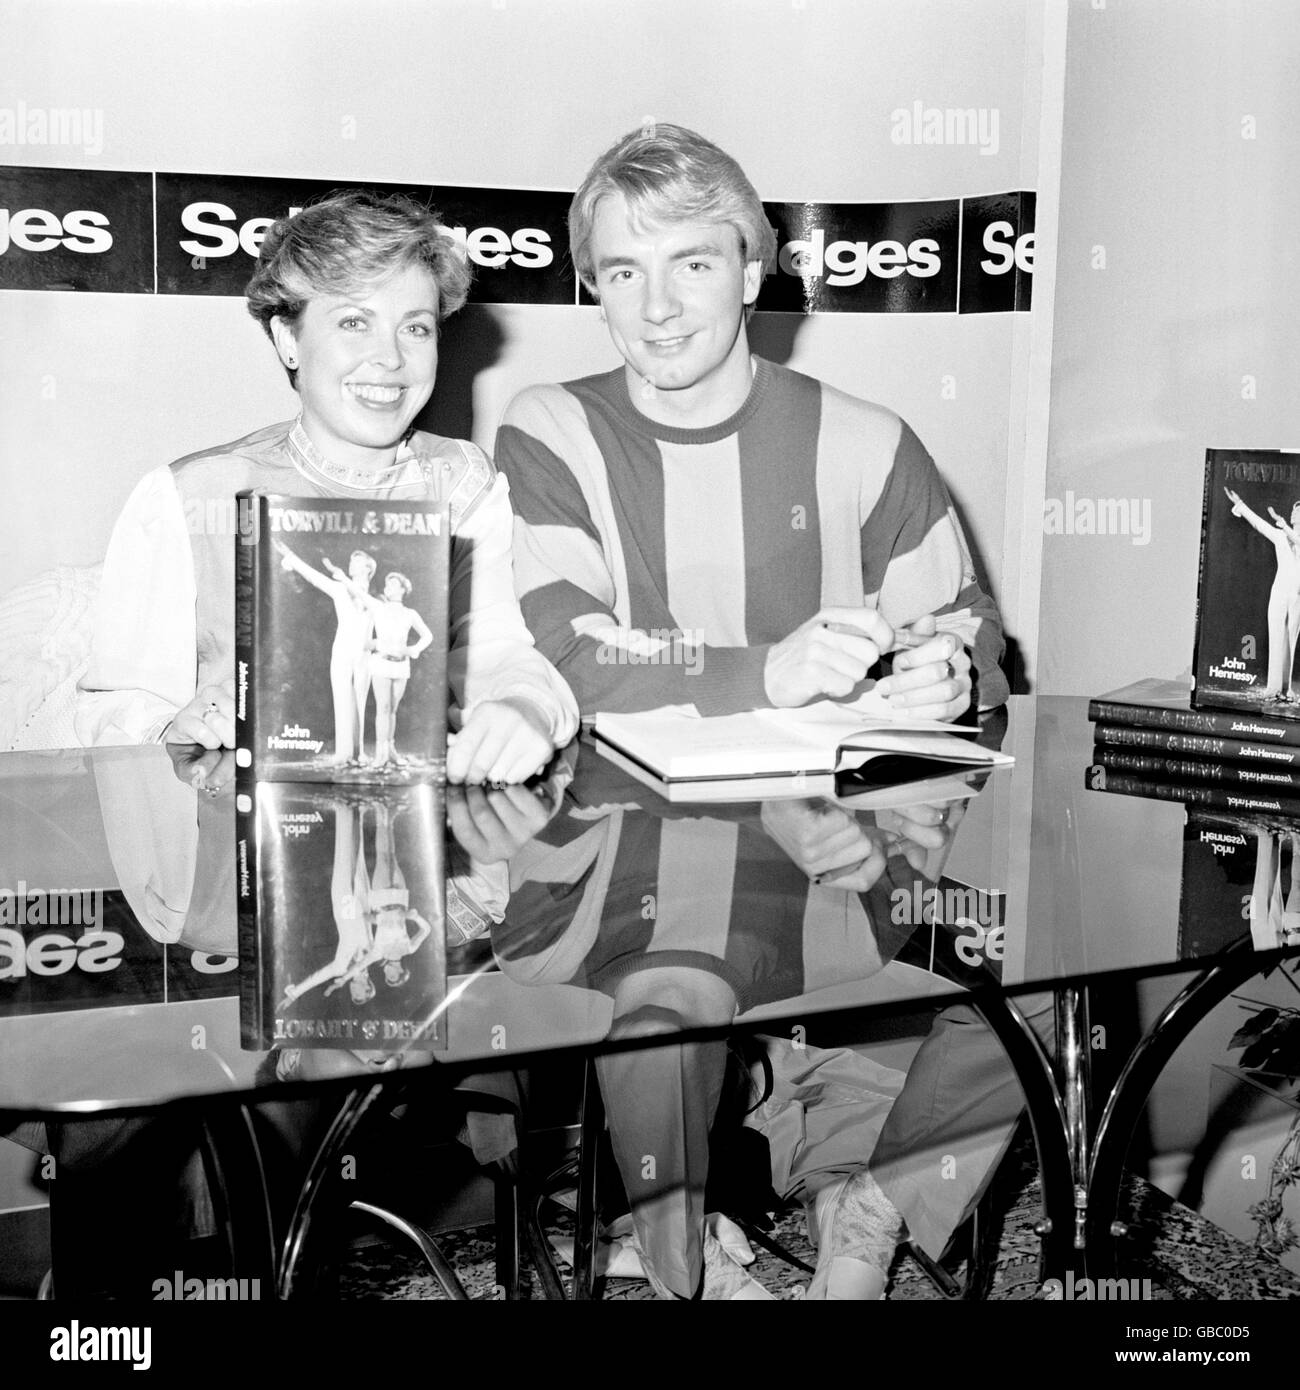 Ice Skating - Torvill and Dean Book Launch - Selfridges - London - 1983. Britain's world beating ice skaters Jayne Torvill and Christopher Dean launching a new book 'Torvill and Dean' at Selfridges. Stock Photo